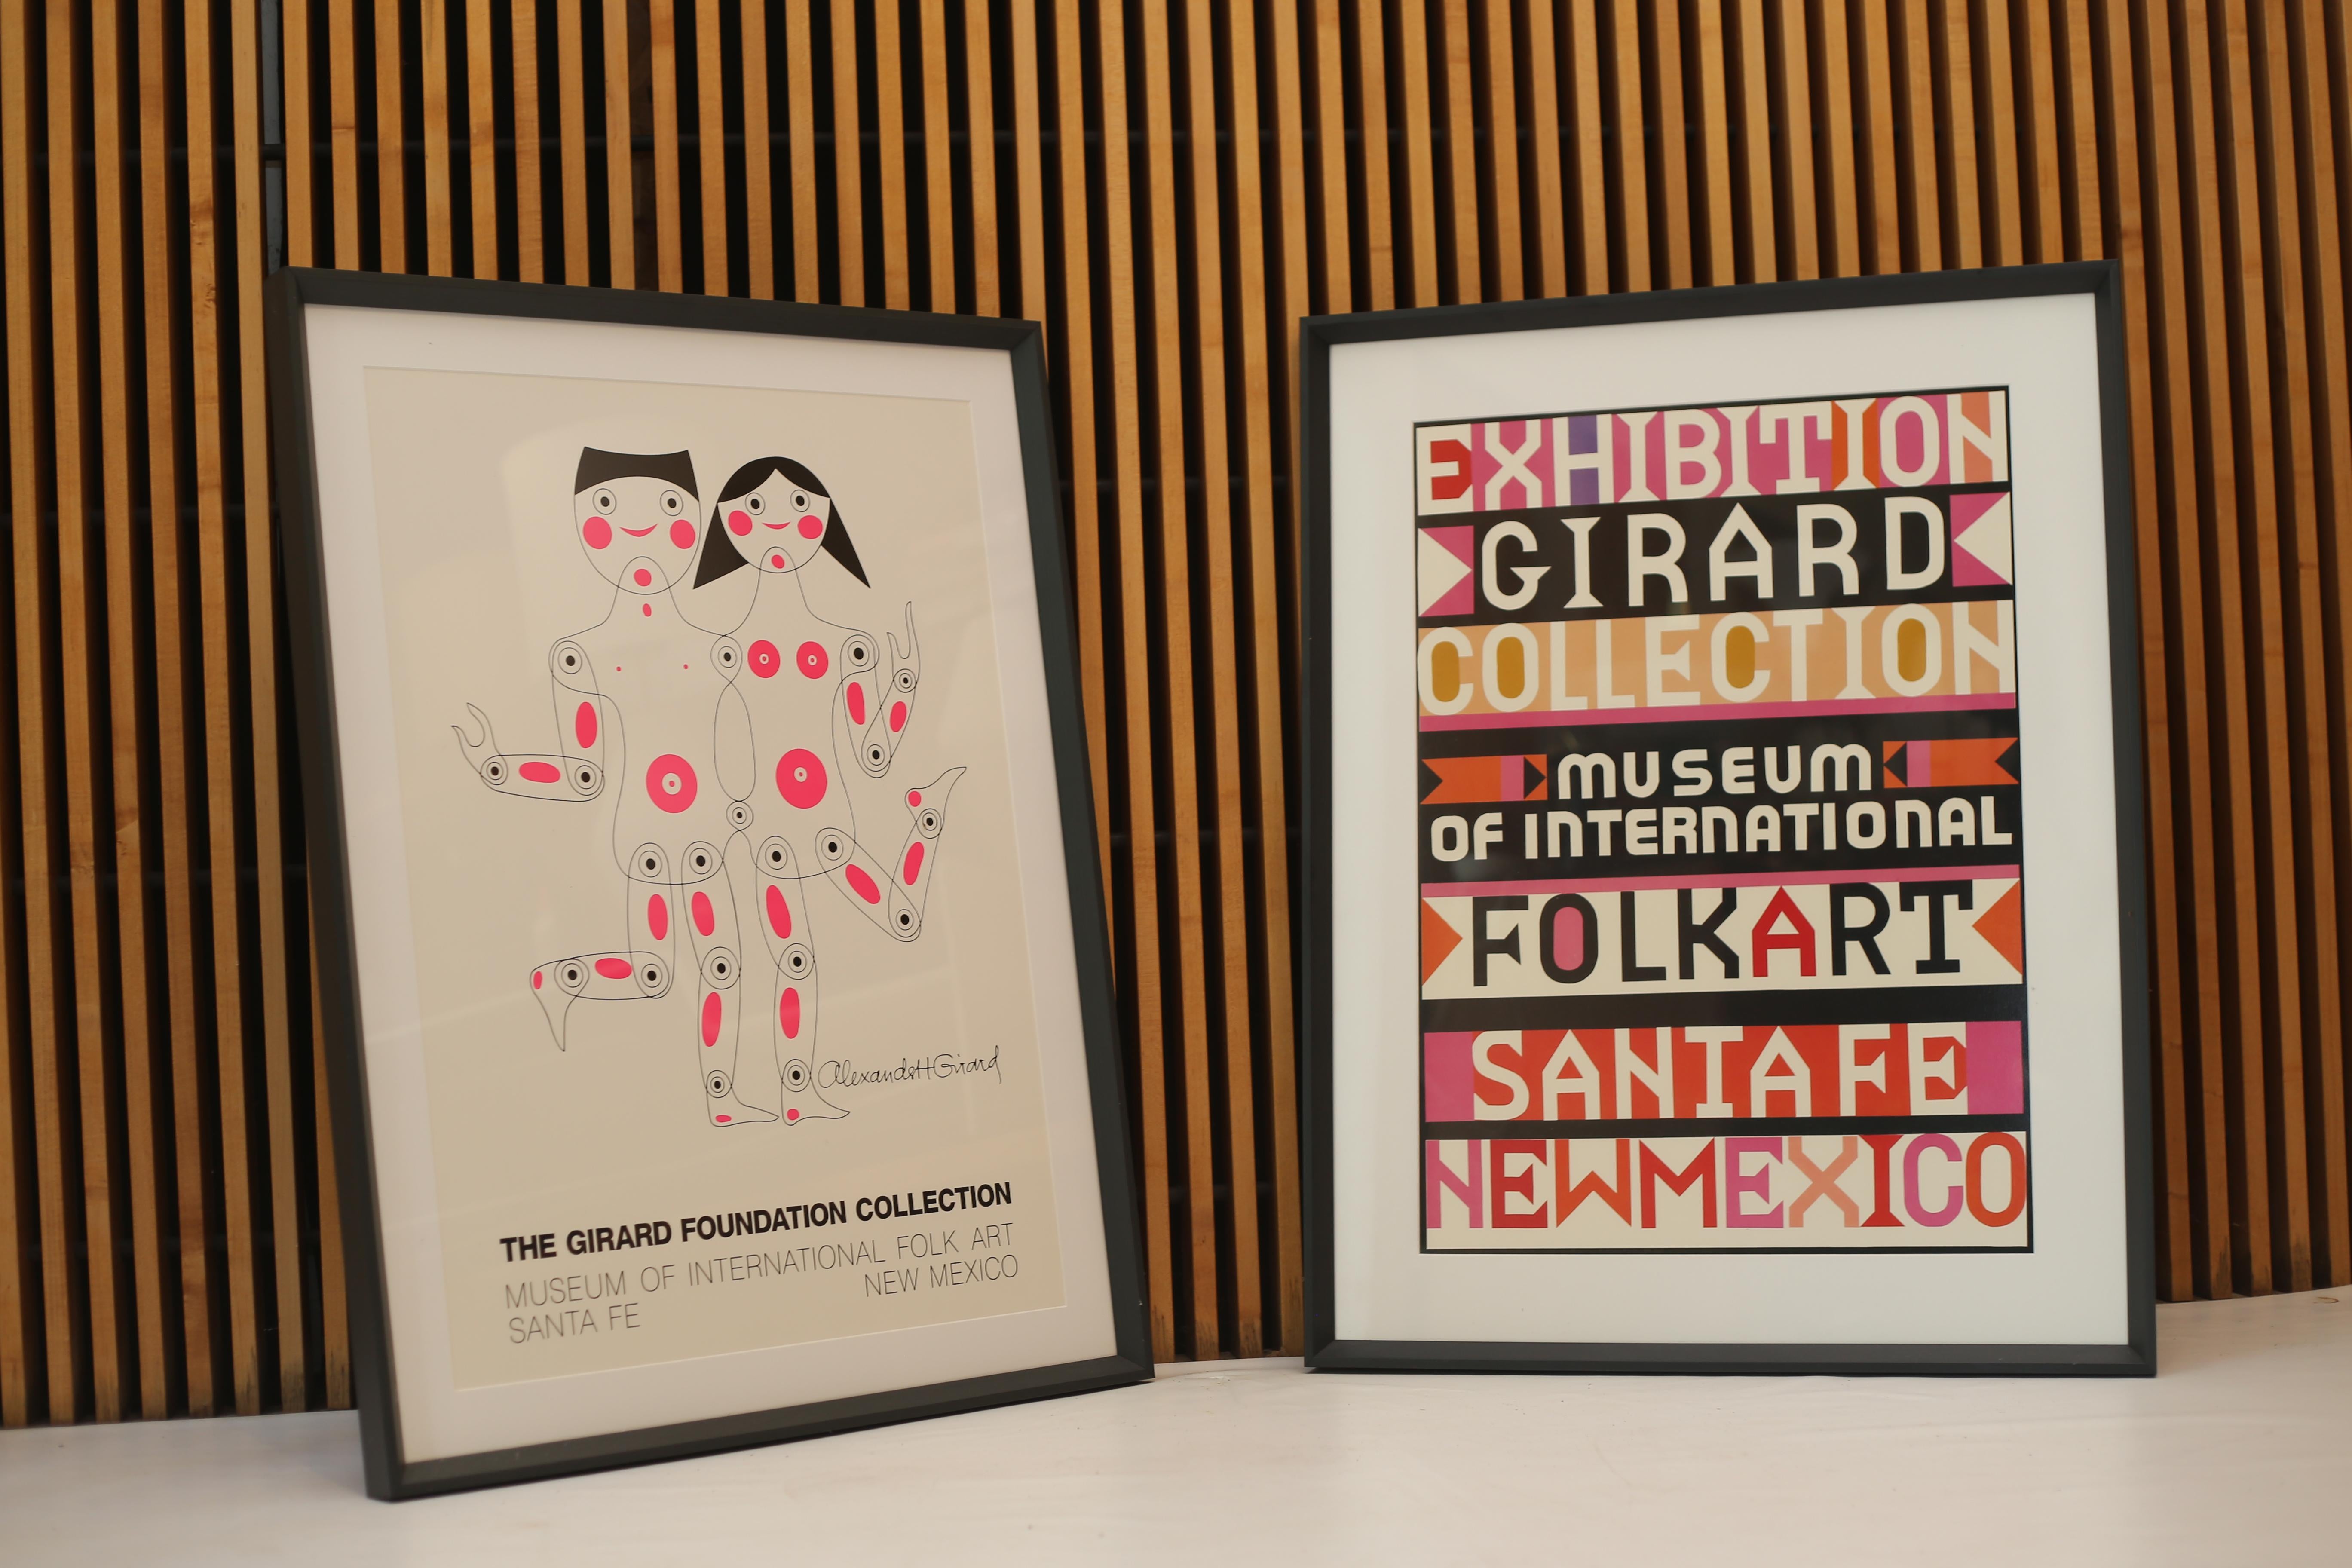 Custom framed new old stock Alexander Girard Exhibition posters from exhibitions in Sante Fe New Mexico, with vibrant pinks and orange colors. 

The posters are custom matted so the frames are the same size. 

Dimensions of frame:
35